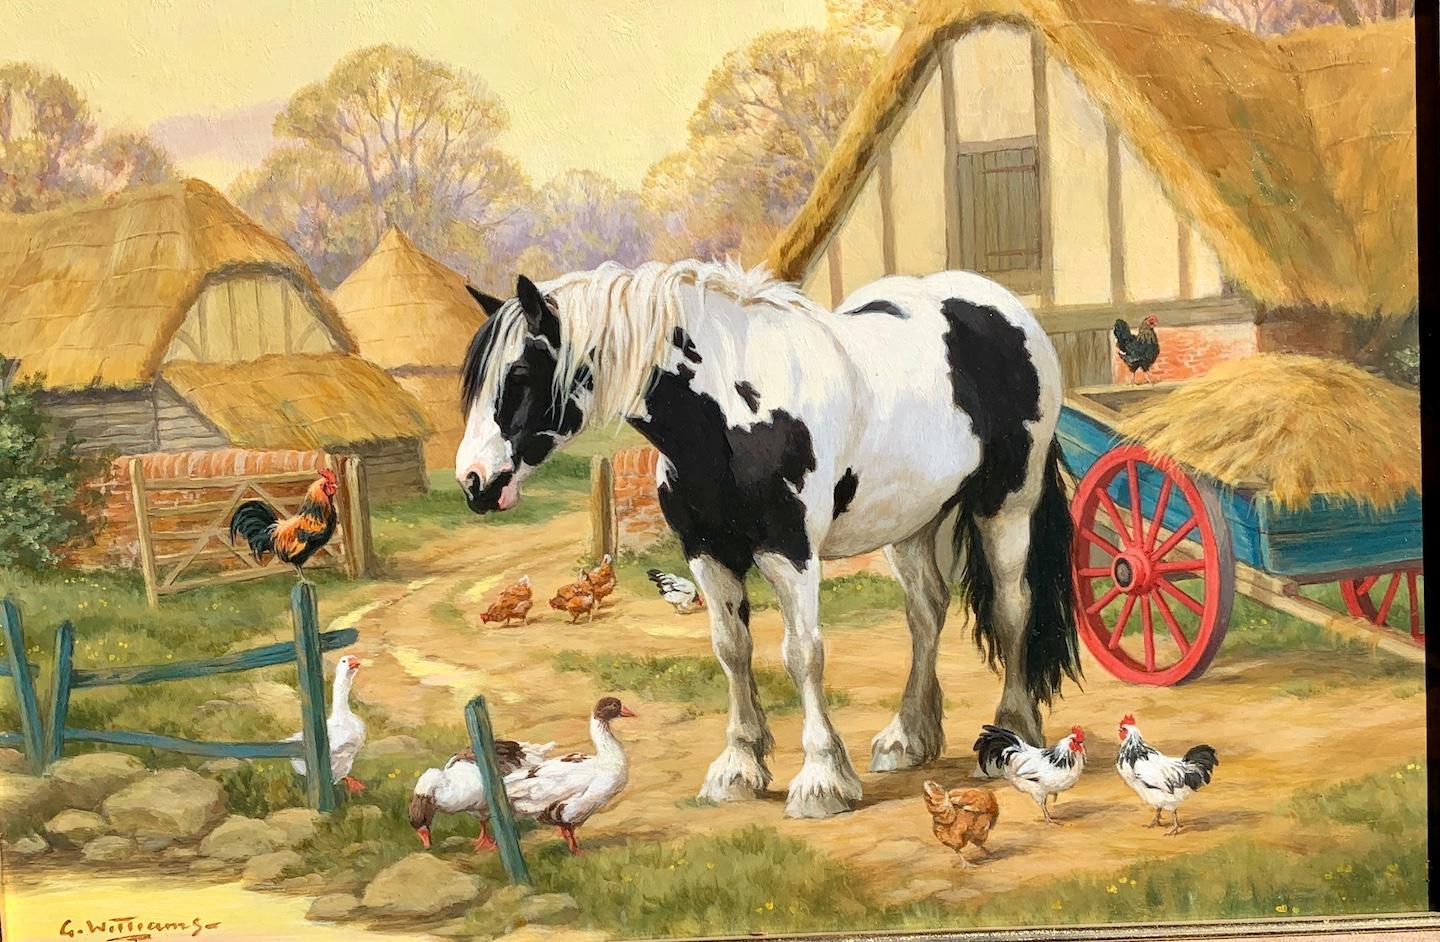 English Farm scene with a Shire horse, chickens, ducks and thatched cottage - Painting by Glynn Williams